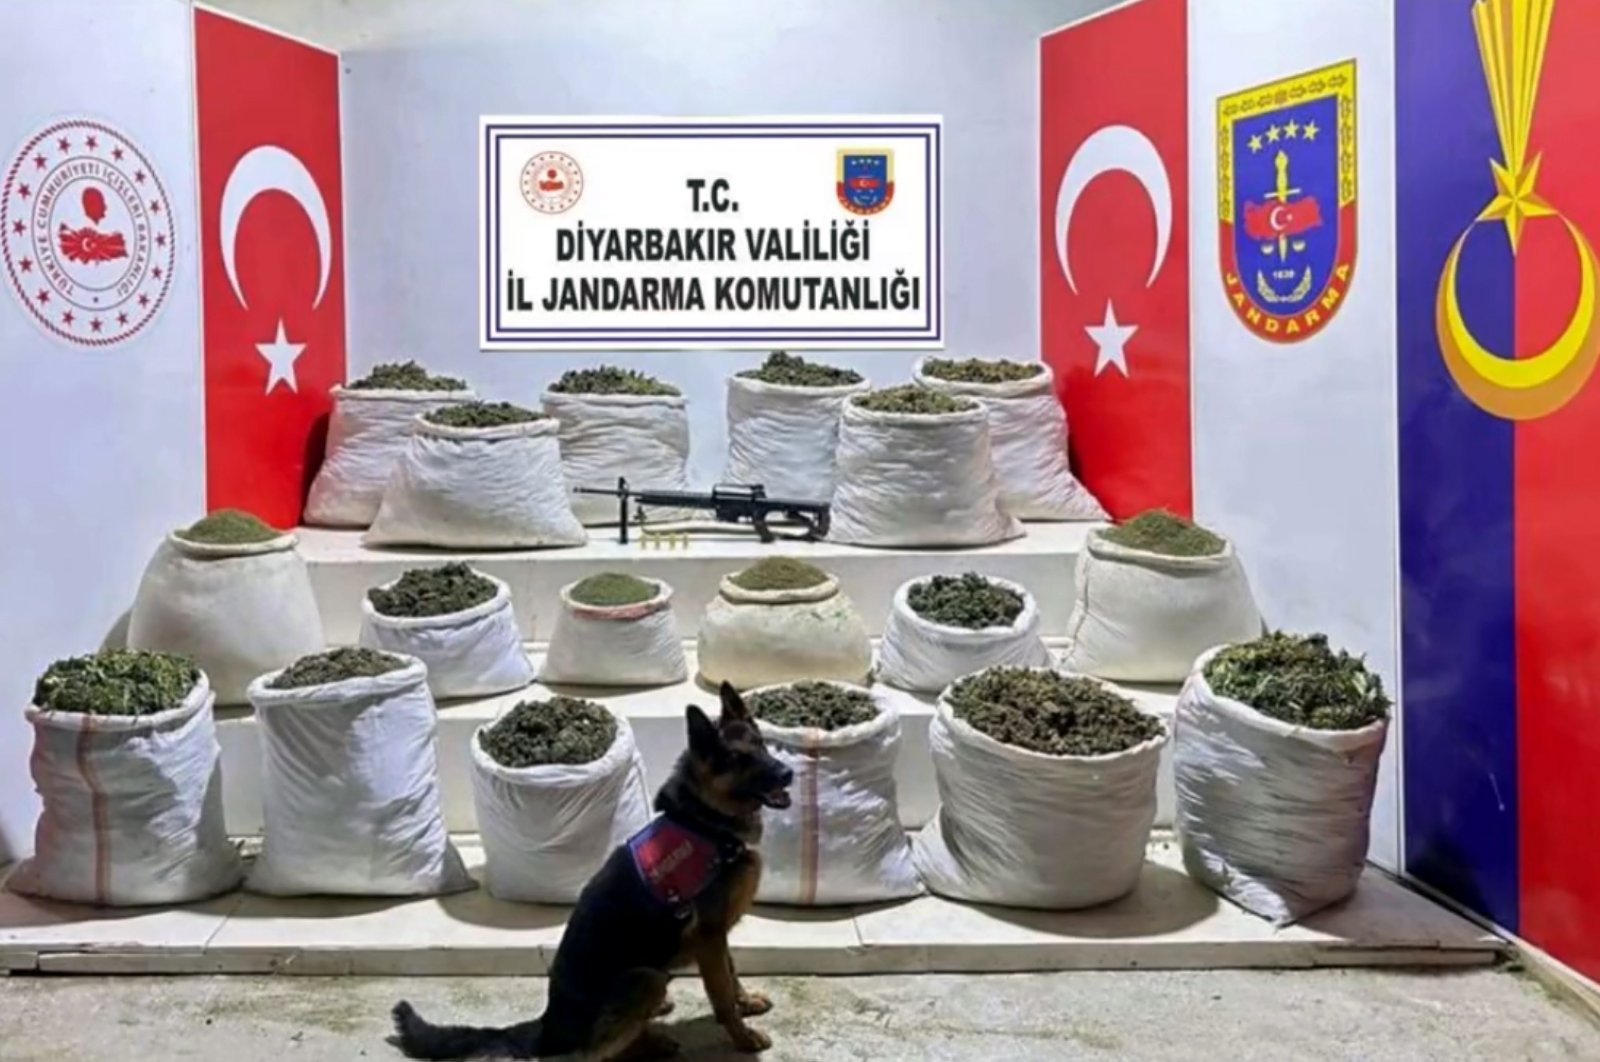 The drugs seized in operations conducted by the Diyarbakır Provincial Gendarmerie Command are on display, Türkiye, Sept. 24, 2023. (DHA Photo)